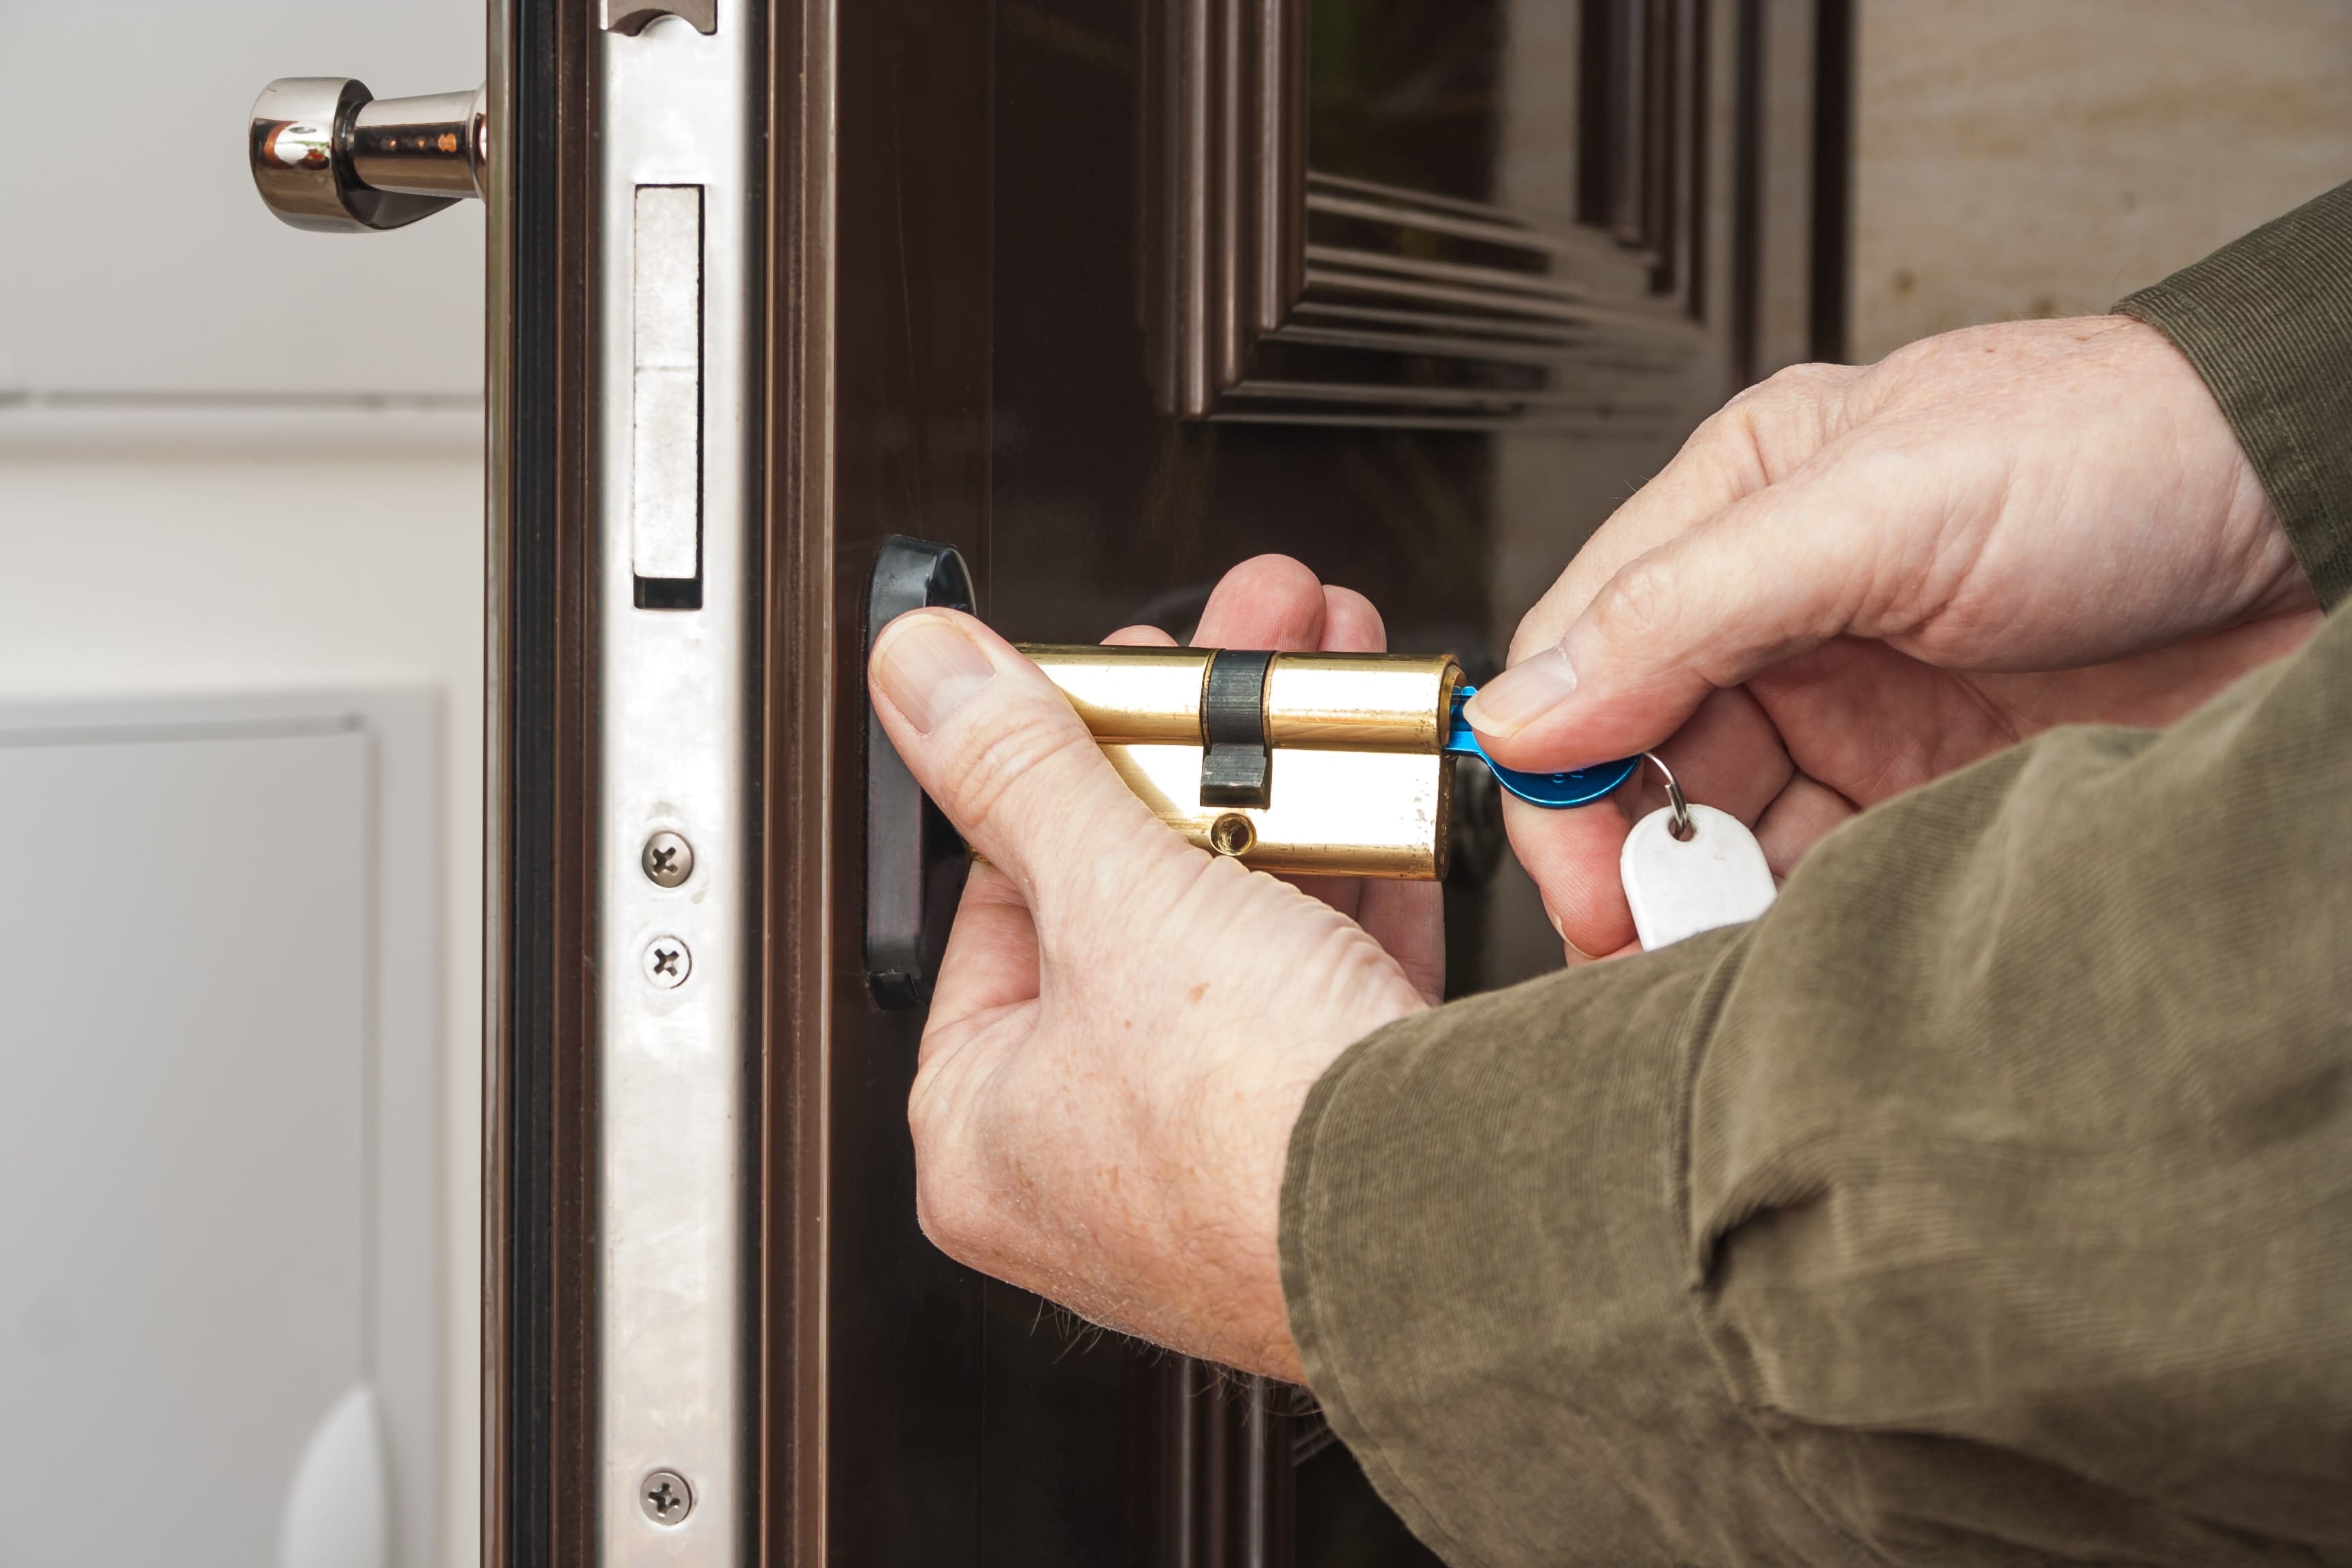 Featured image for “How to Secure Your Home on a Budget, Without Compromising Security”